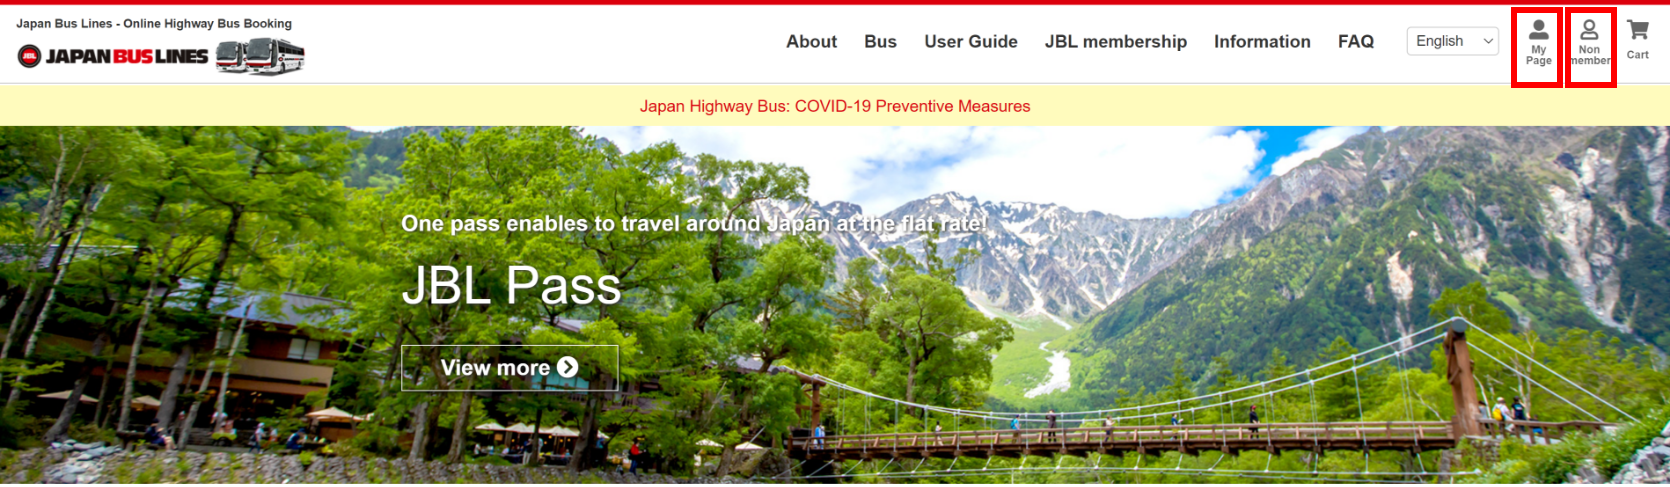 Log in from the 'My Page' icon to your JAPAN BUS LINES member account